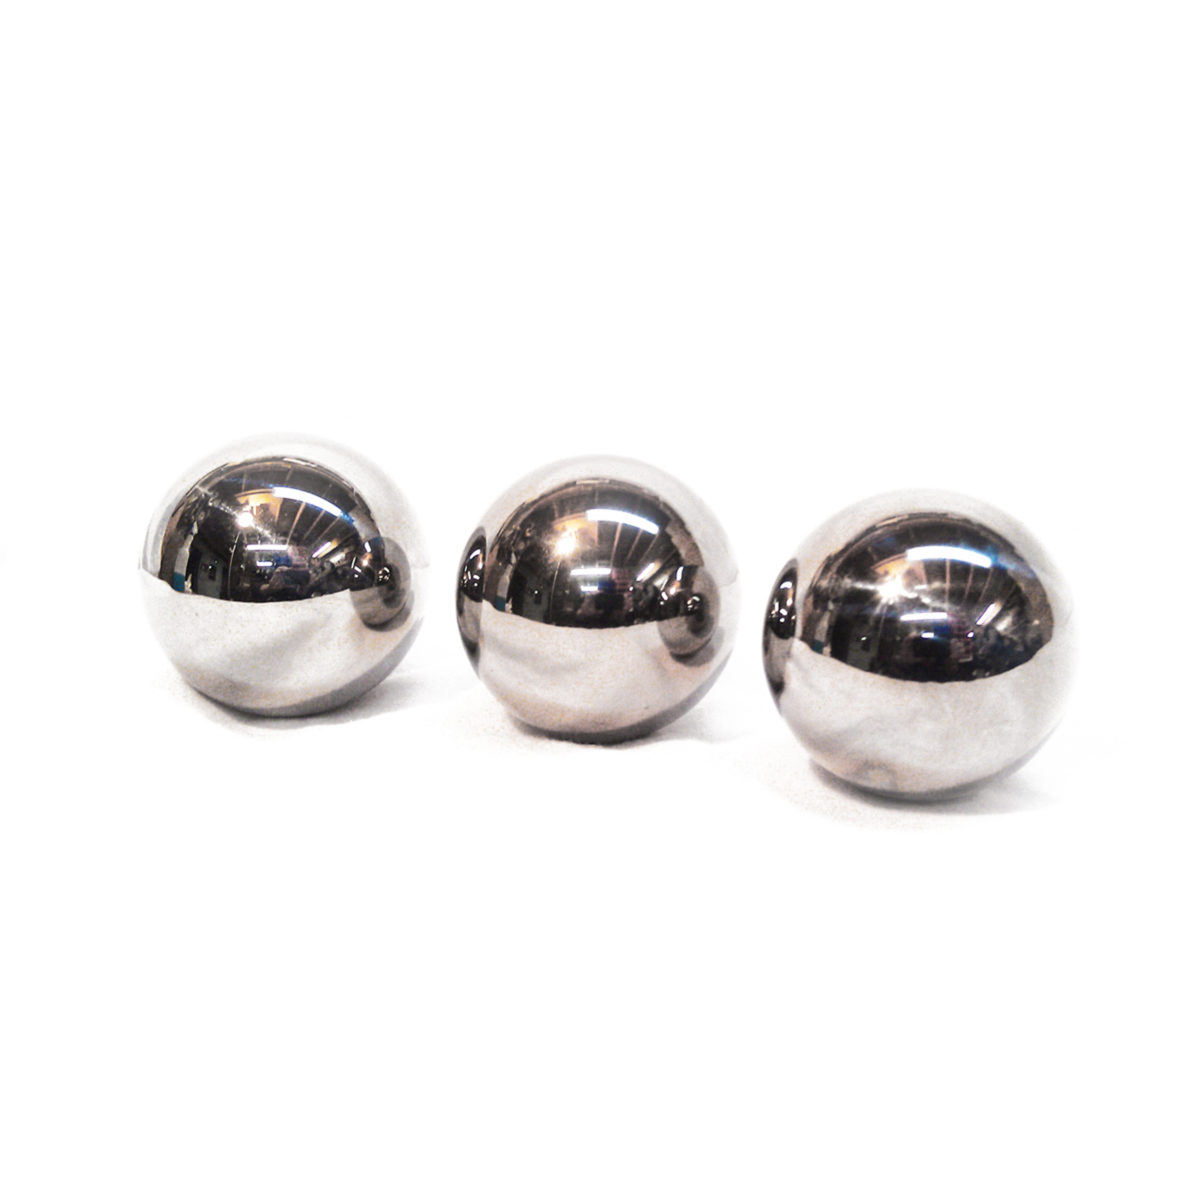 mdrs ball set c 3 solid chrome steel